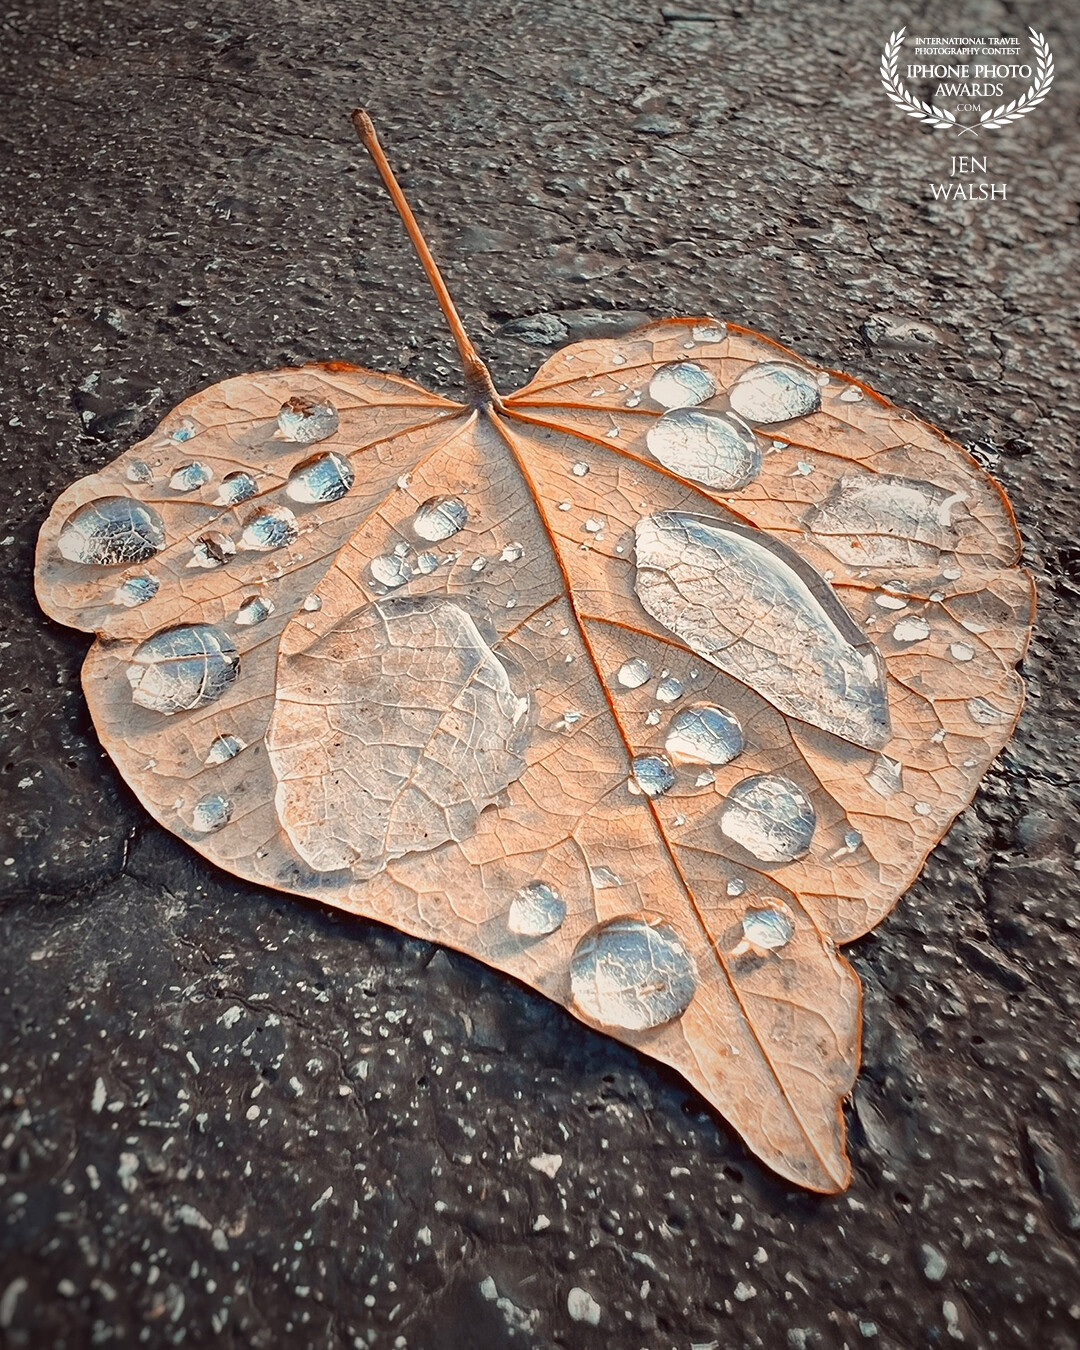 One lonesome leaf on our driveway survived the winter, only to be rained upon the first few days of spring.